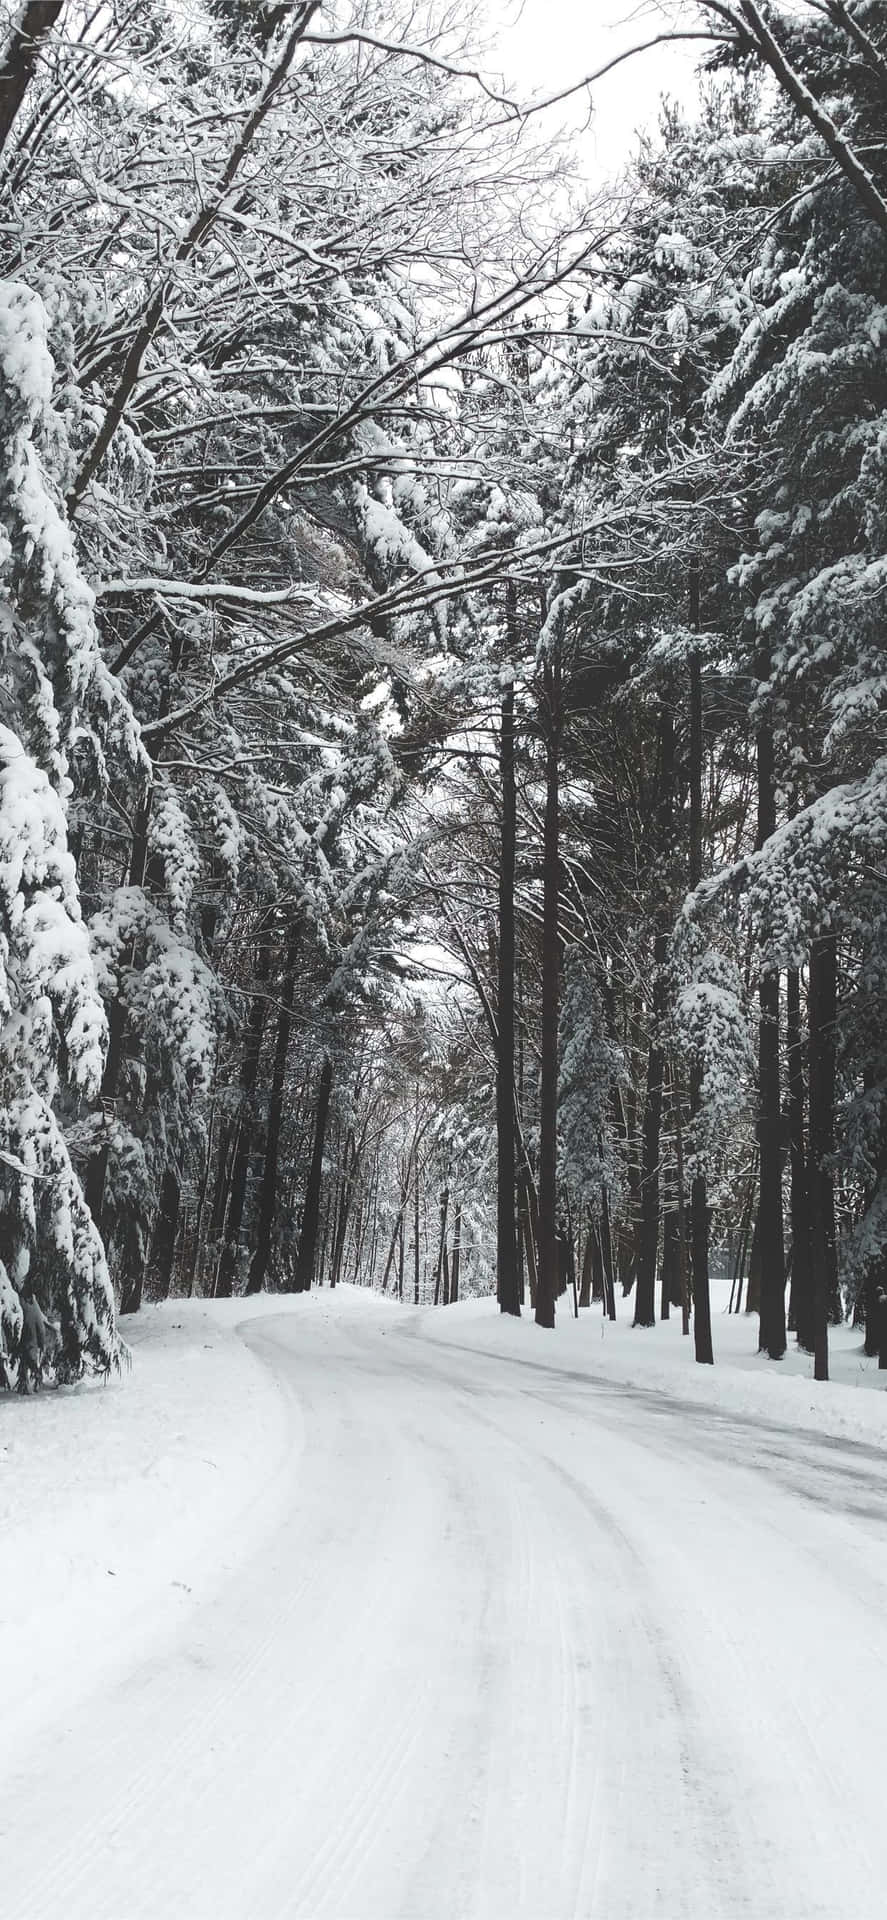 Enjoy the breathtaking winter snowfall with iPhone Wallpaper